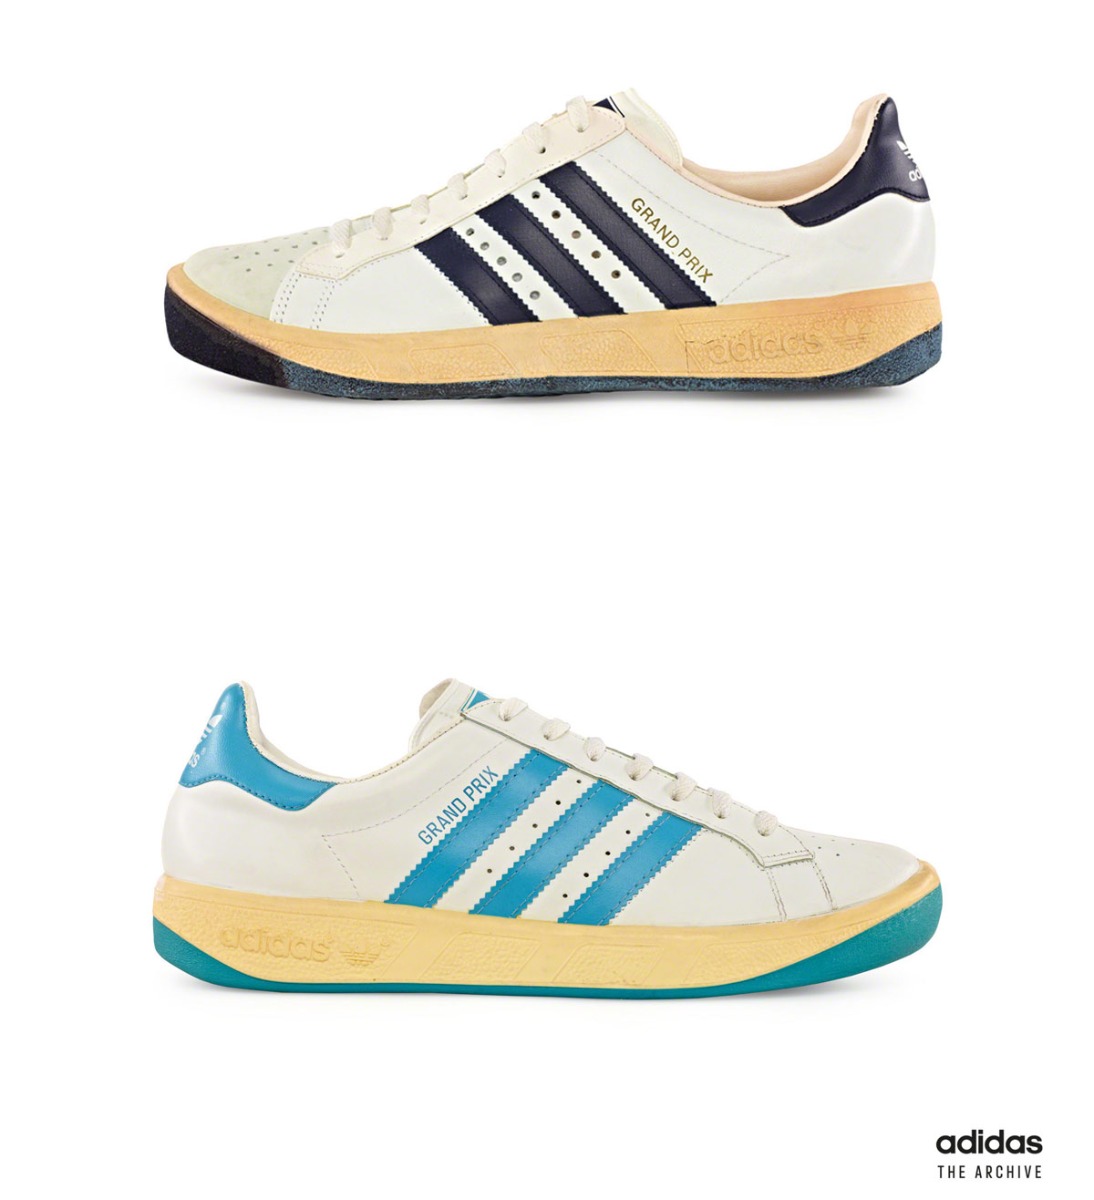 ICONS NEVER DIE: THE ADIDAS GRAND PRIX 